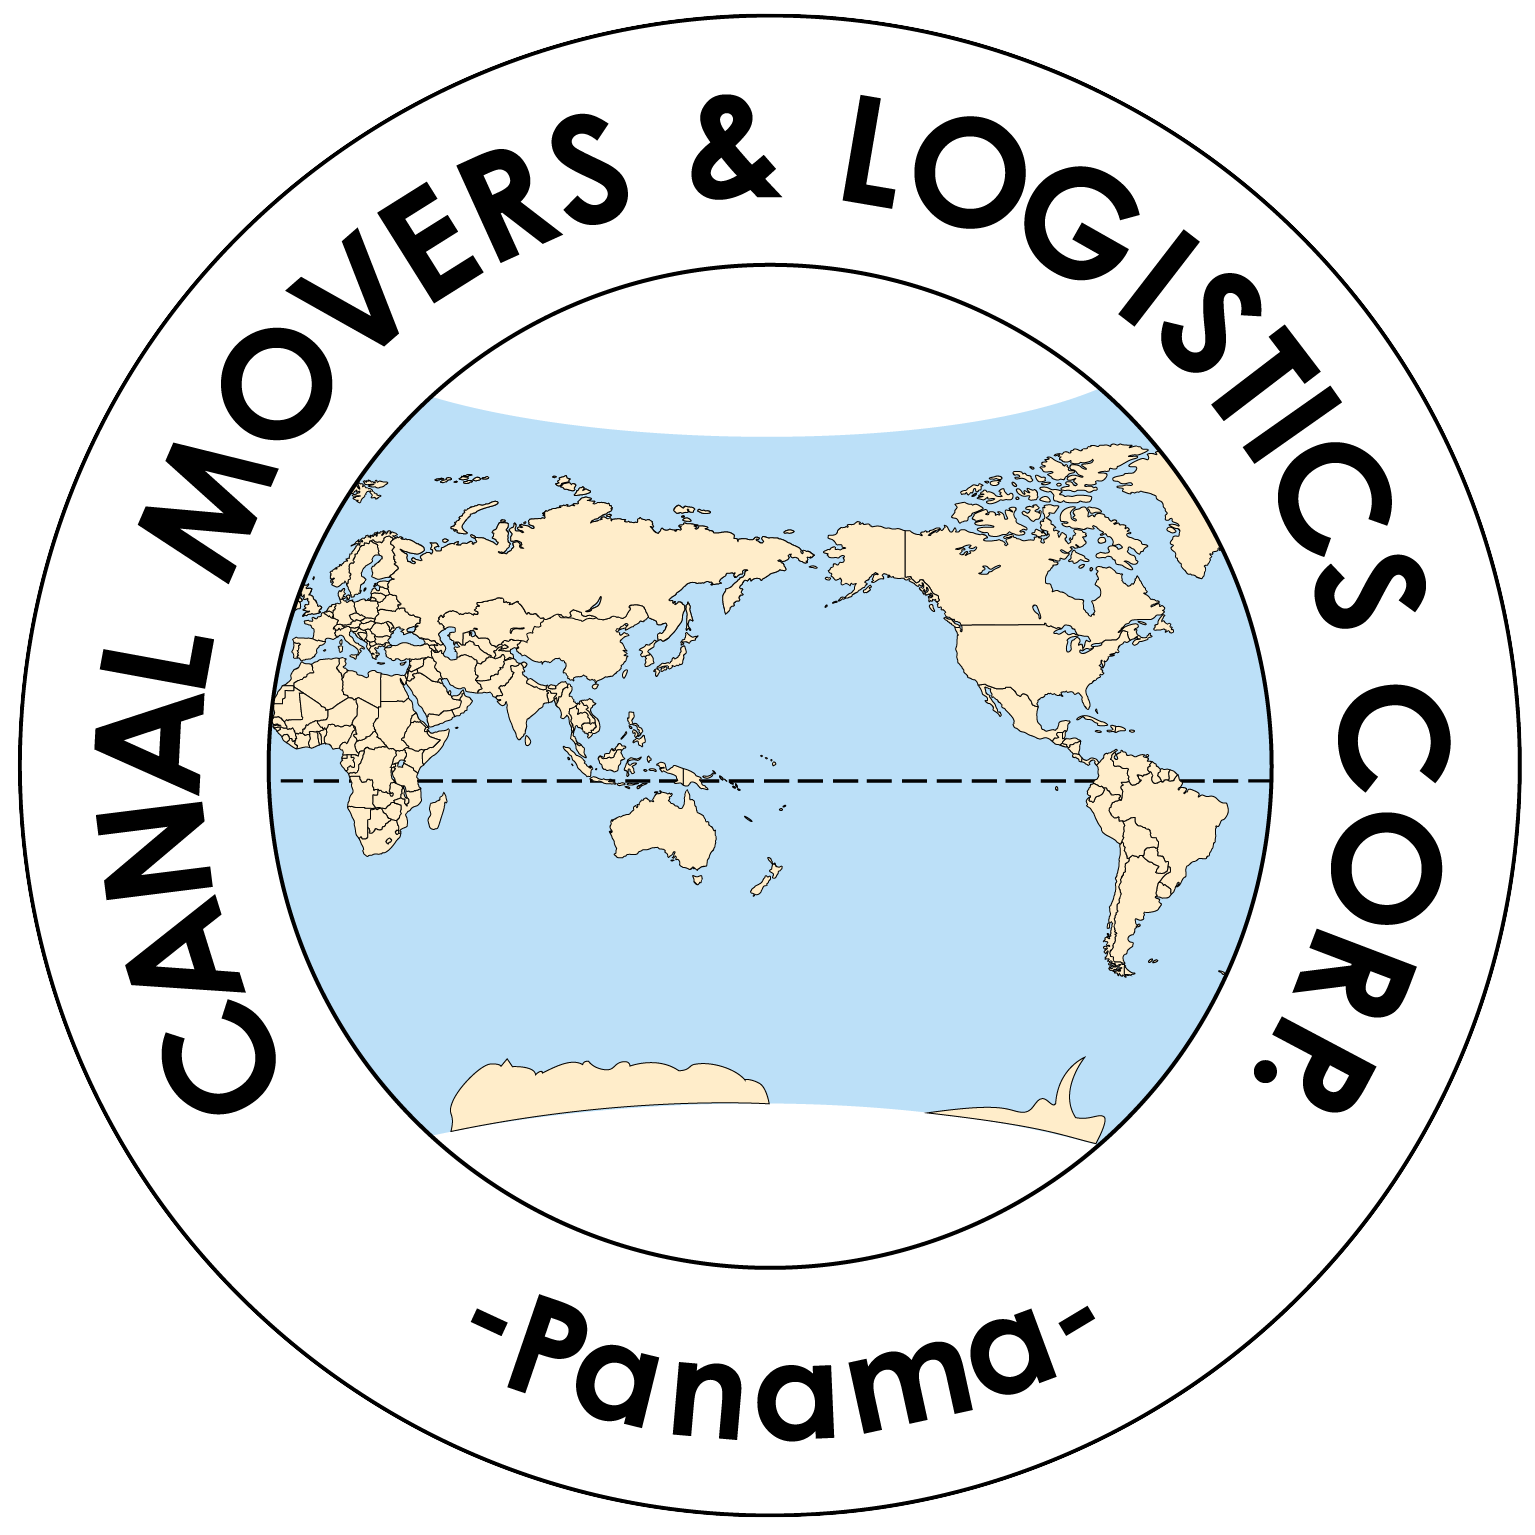 Canal Movers & Logistics Corp.